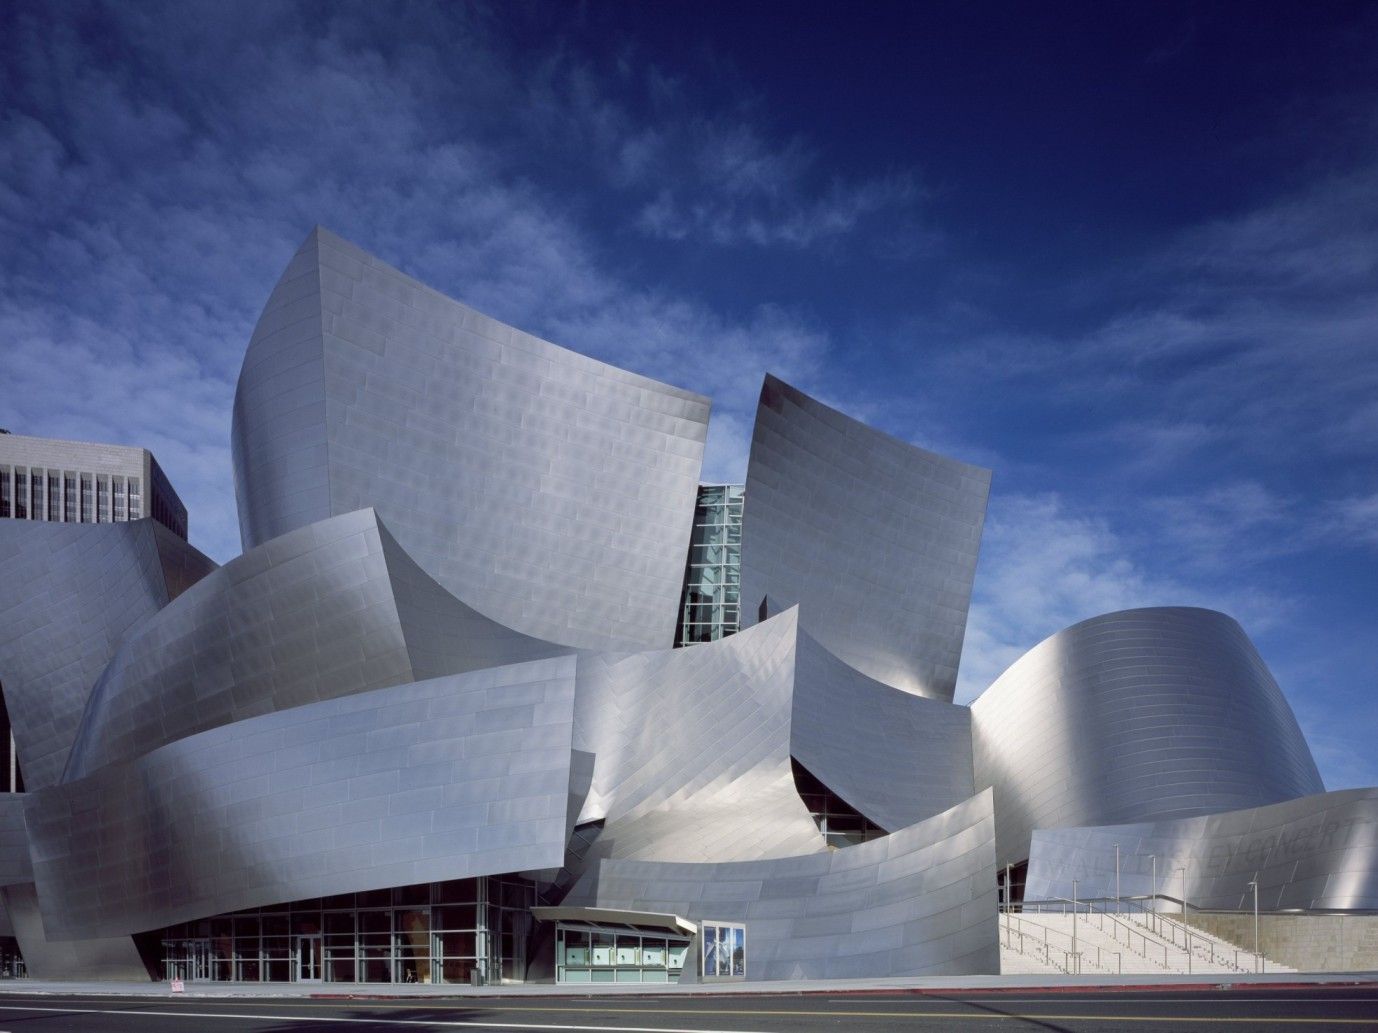 The stainless steel exterior of Walt Disney Concert Hall by Frank Gehry